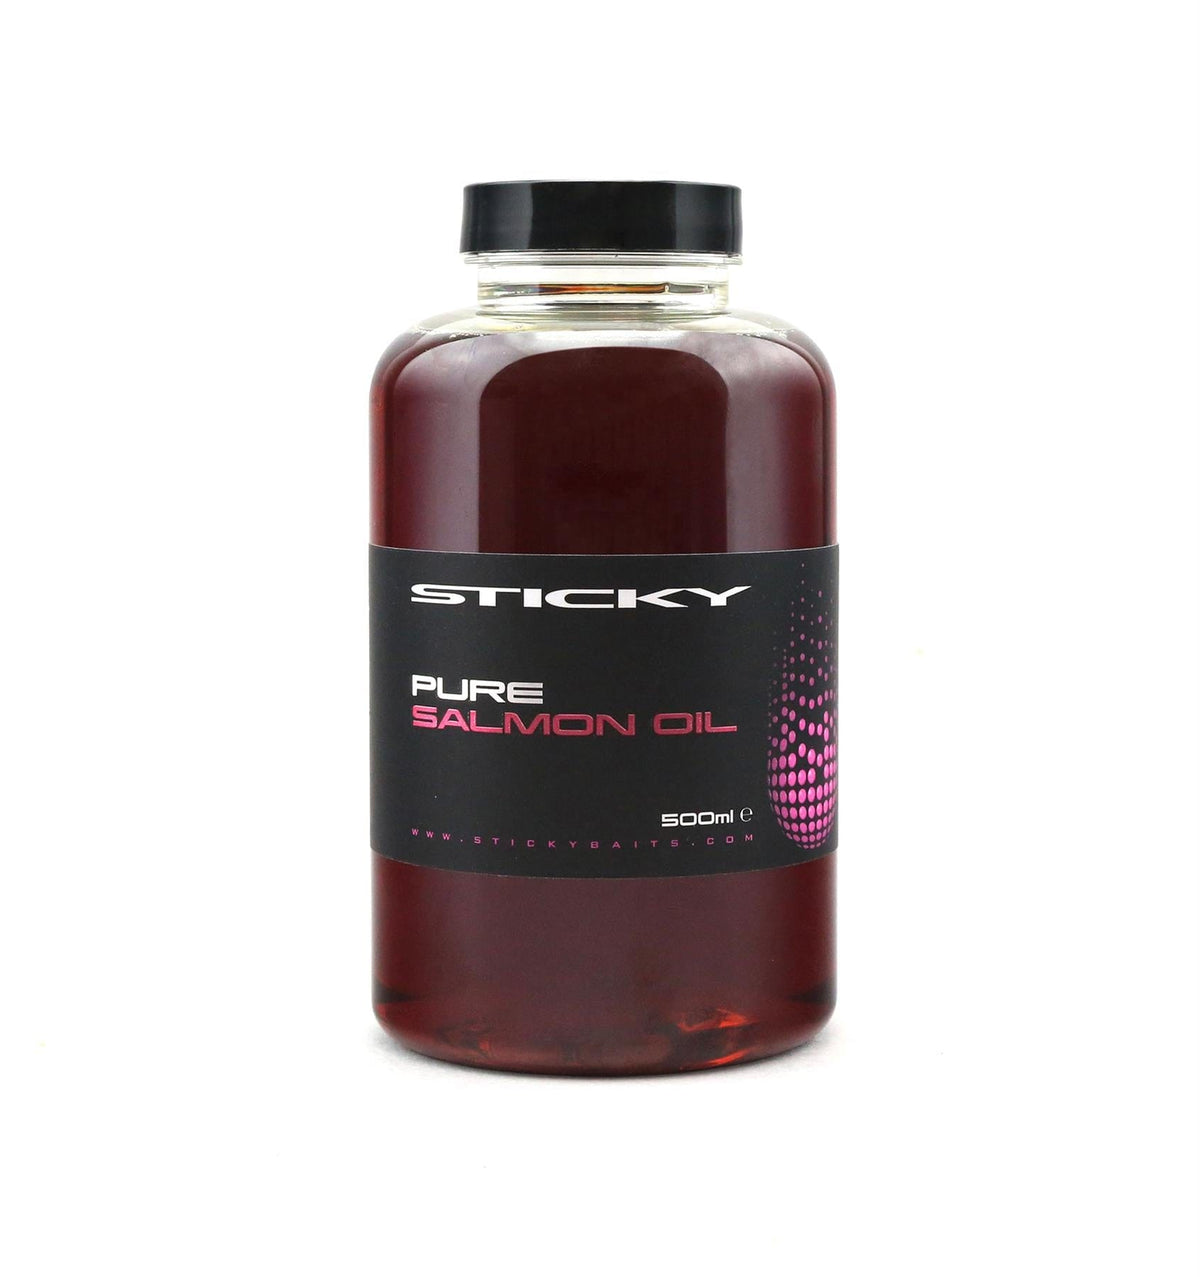 Sticky Baits Pure Oil - 500ml